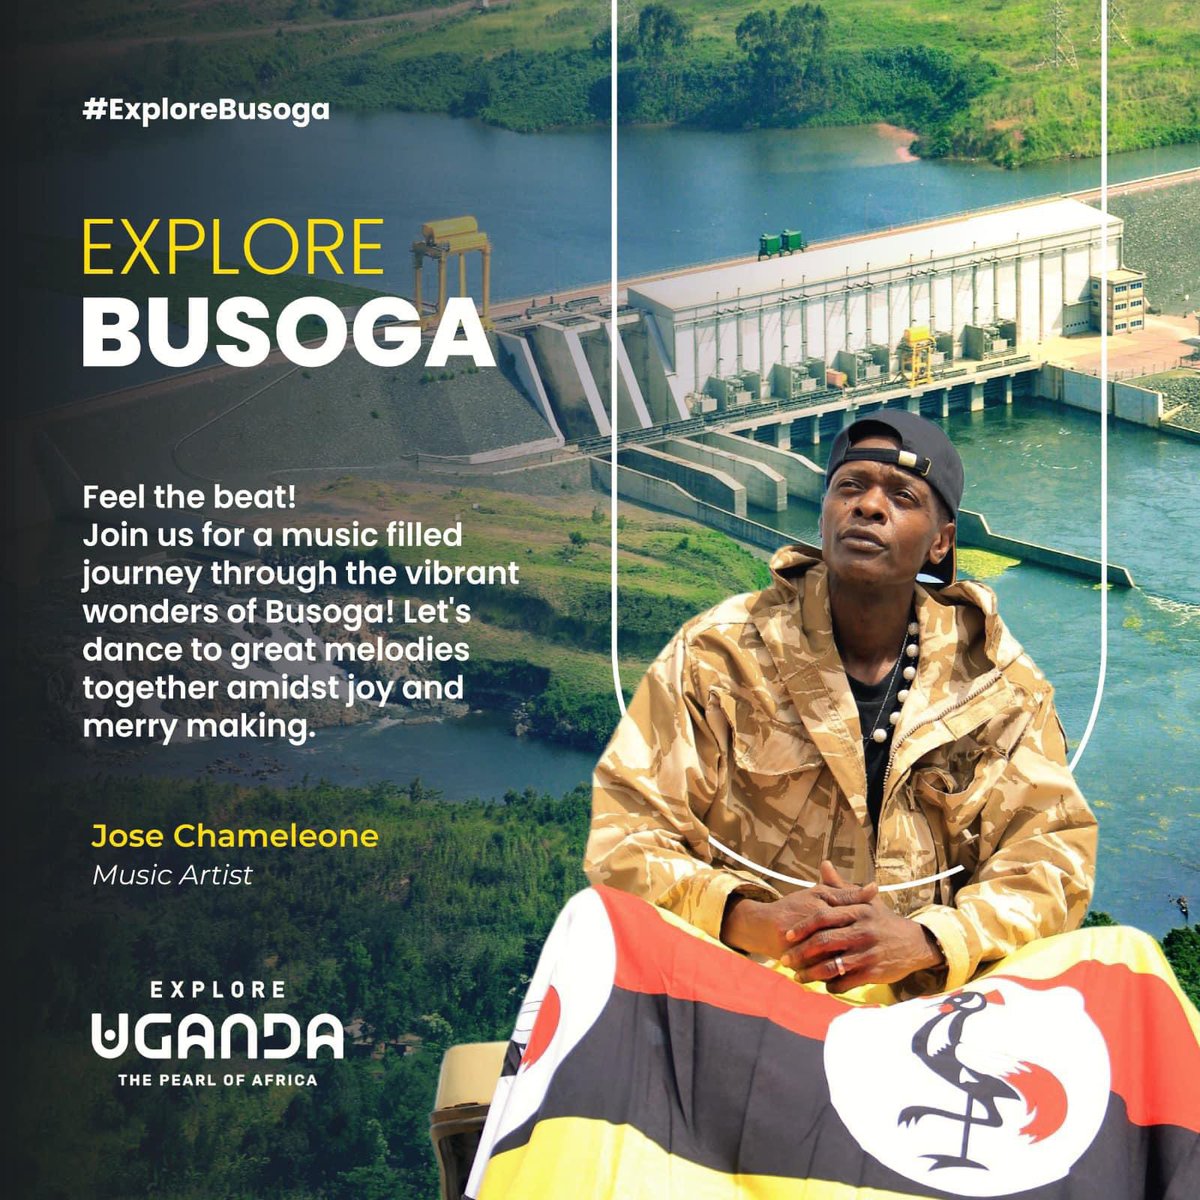 EXPORE BUSOGA not only that. 

The Culture, the people, the beauty, the gem of Uganda. Where the great River Nile springs to flow!!

 Industrial that the best beer in the world-Nile beer is made. So much that we can’t compare else where 
Join me on this journey #ExploreBusoga